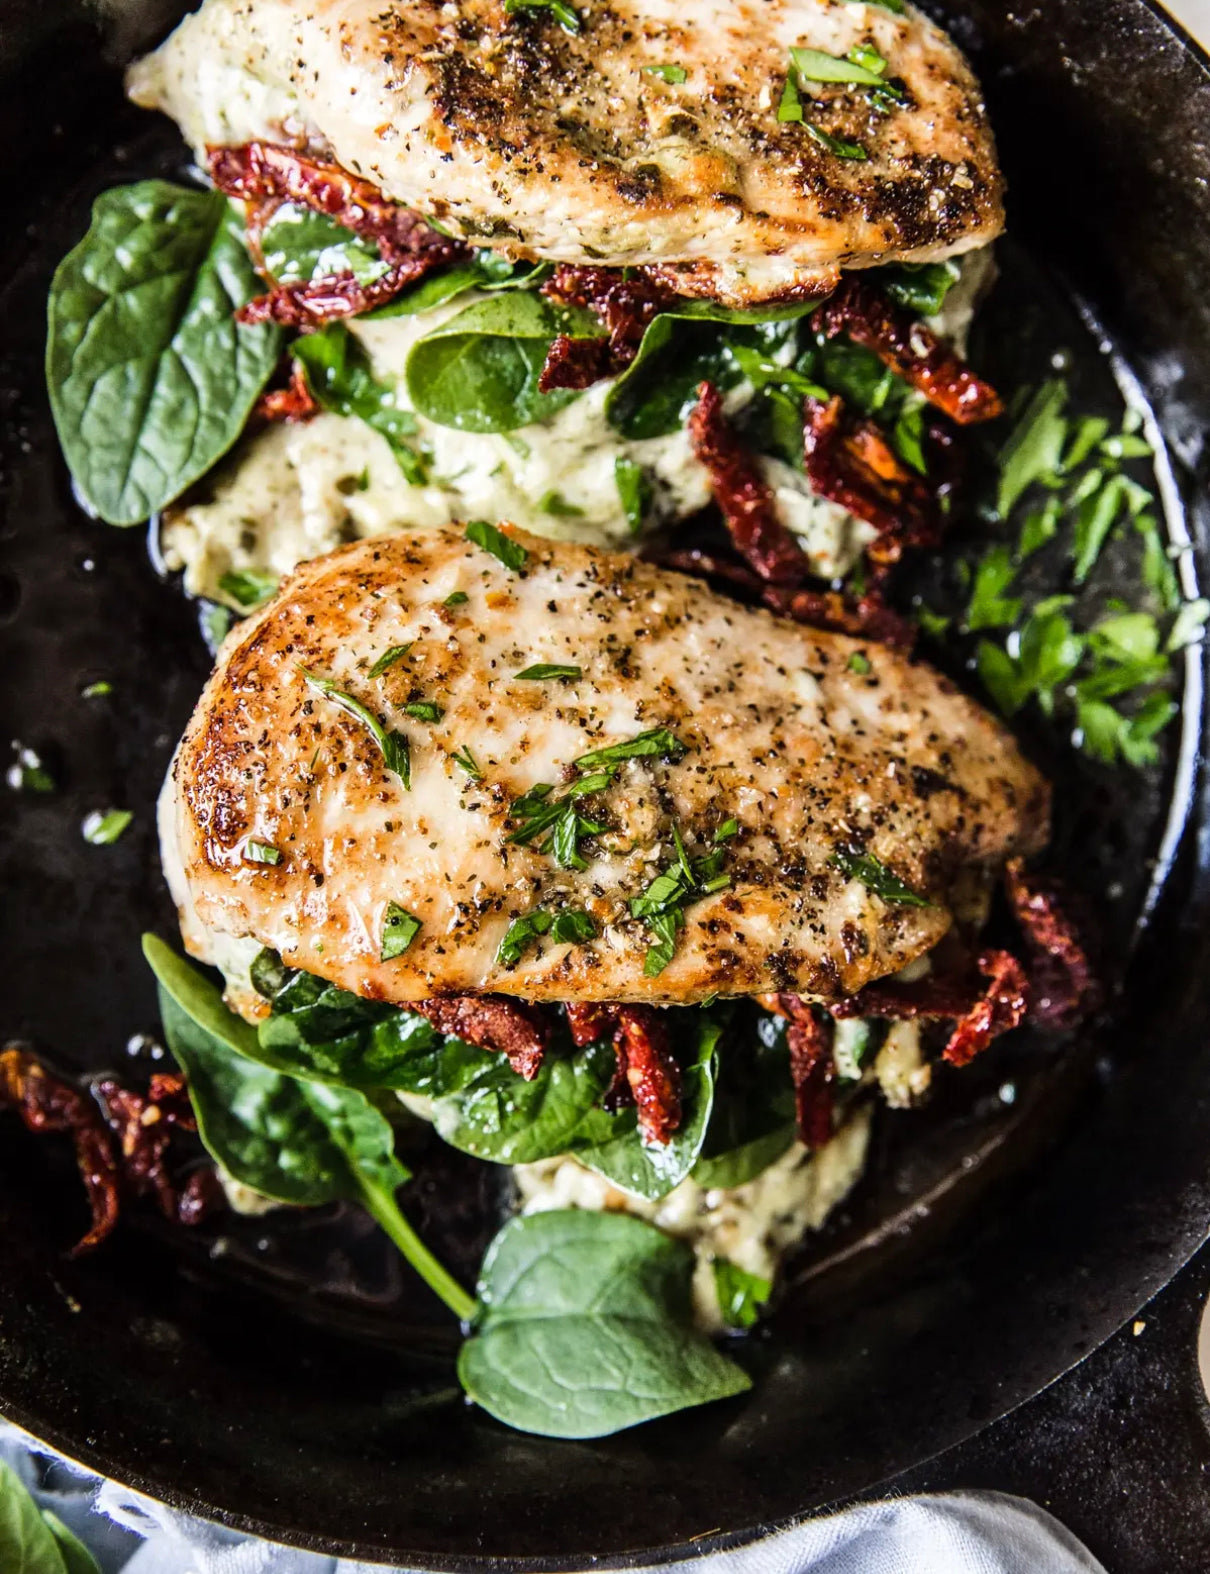 Stuffed Chicken Breast with Spinach, Cheese and Sun-Dried Tomatoes